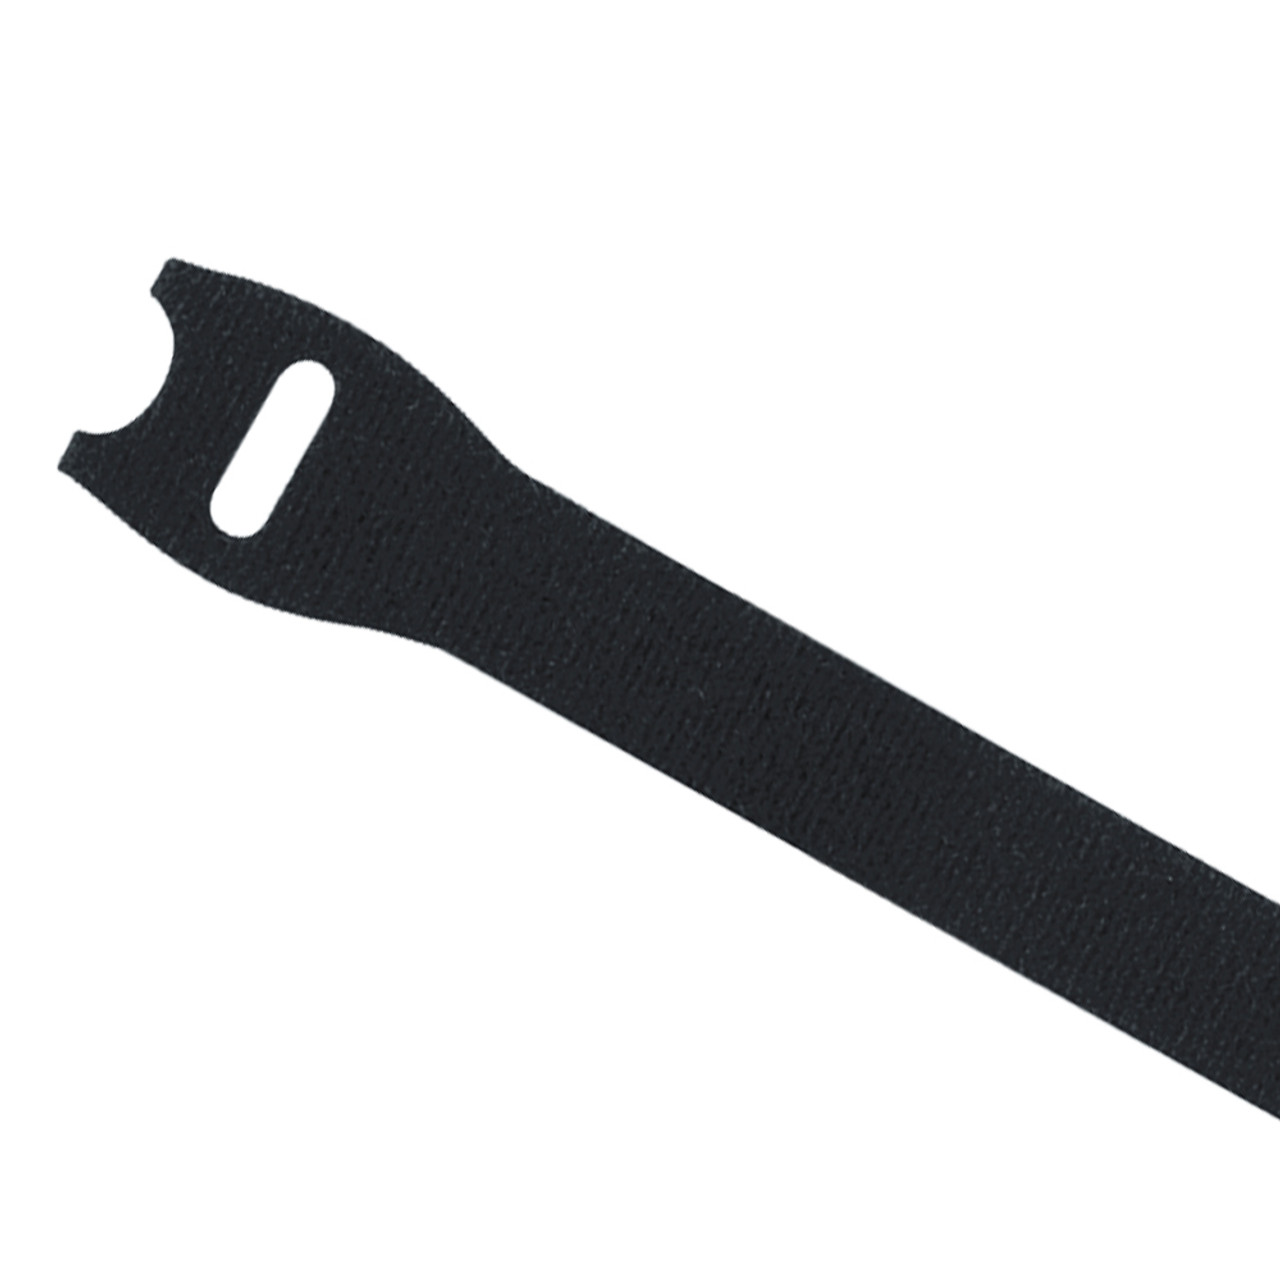 VELCRO® Brand ONE-WRAP® Cable Tie Strap in Black in 100 PCS-8 IN - 1 Roll -  100 PCS 